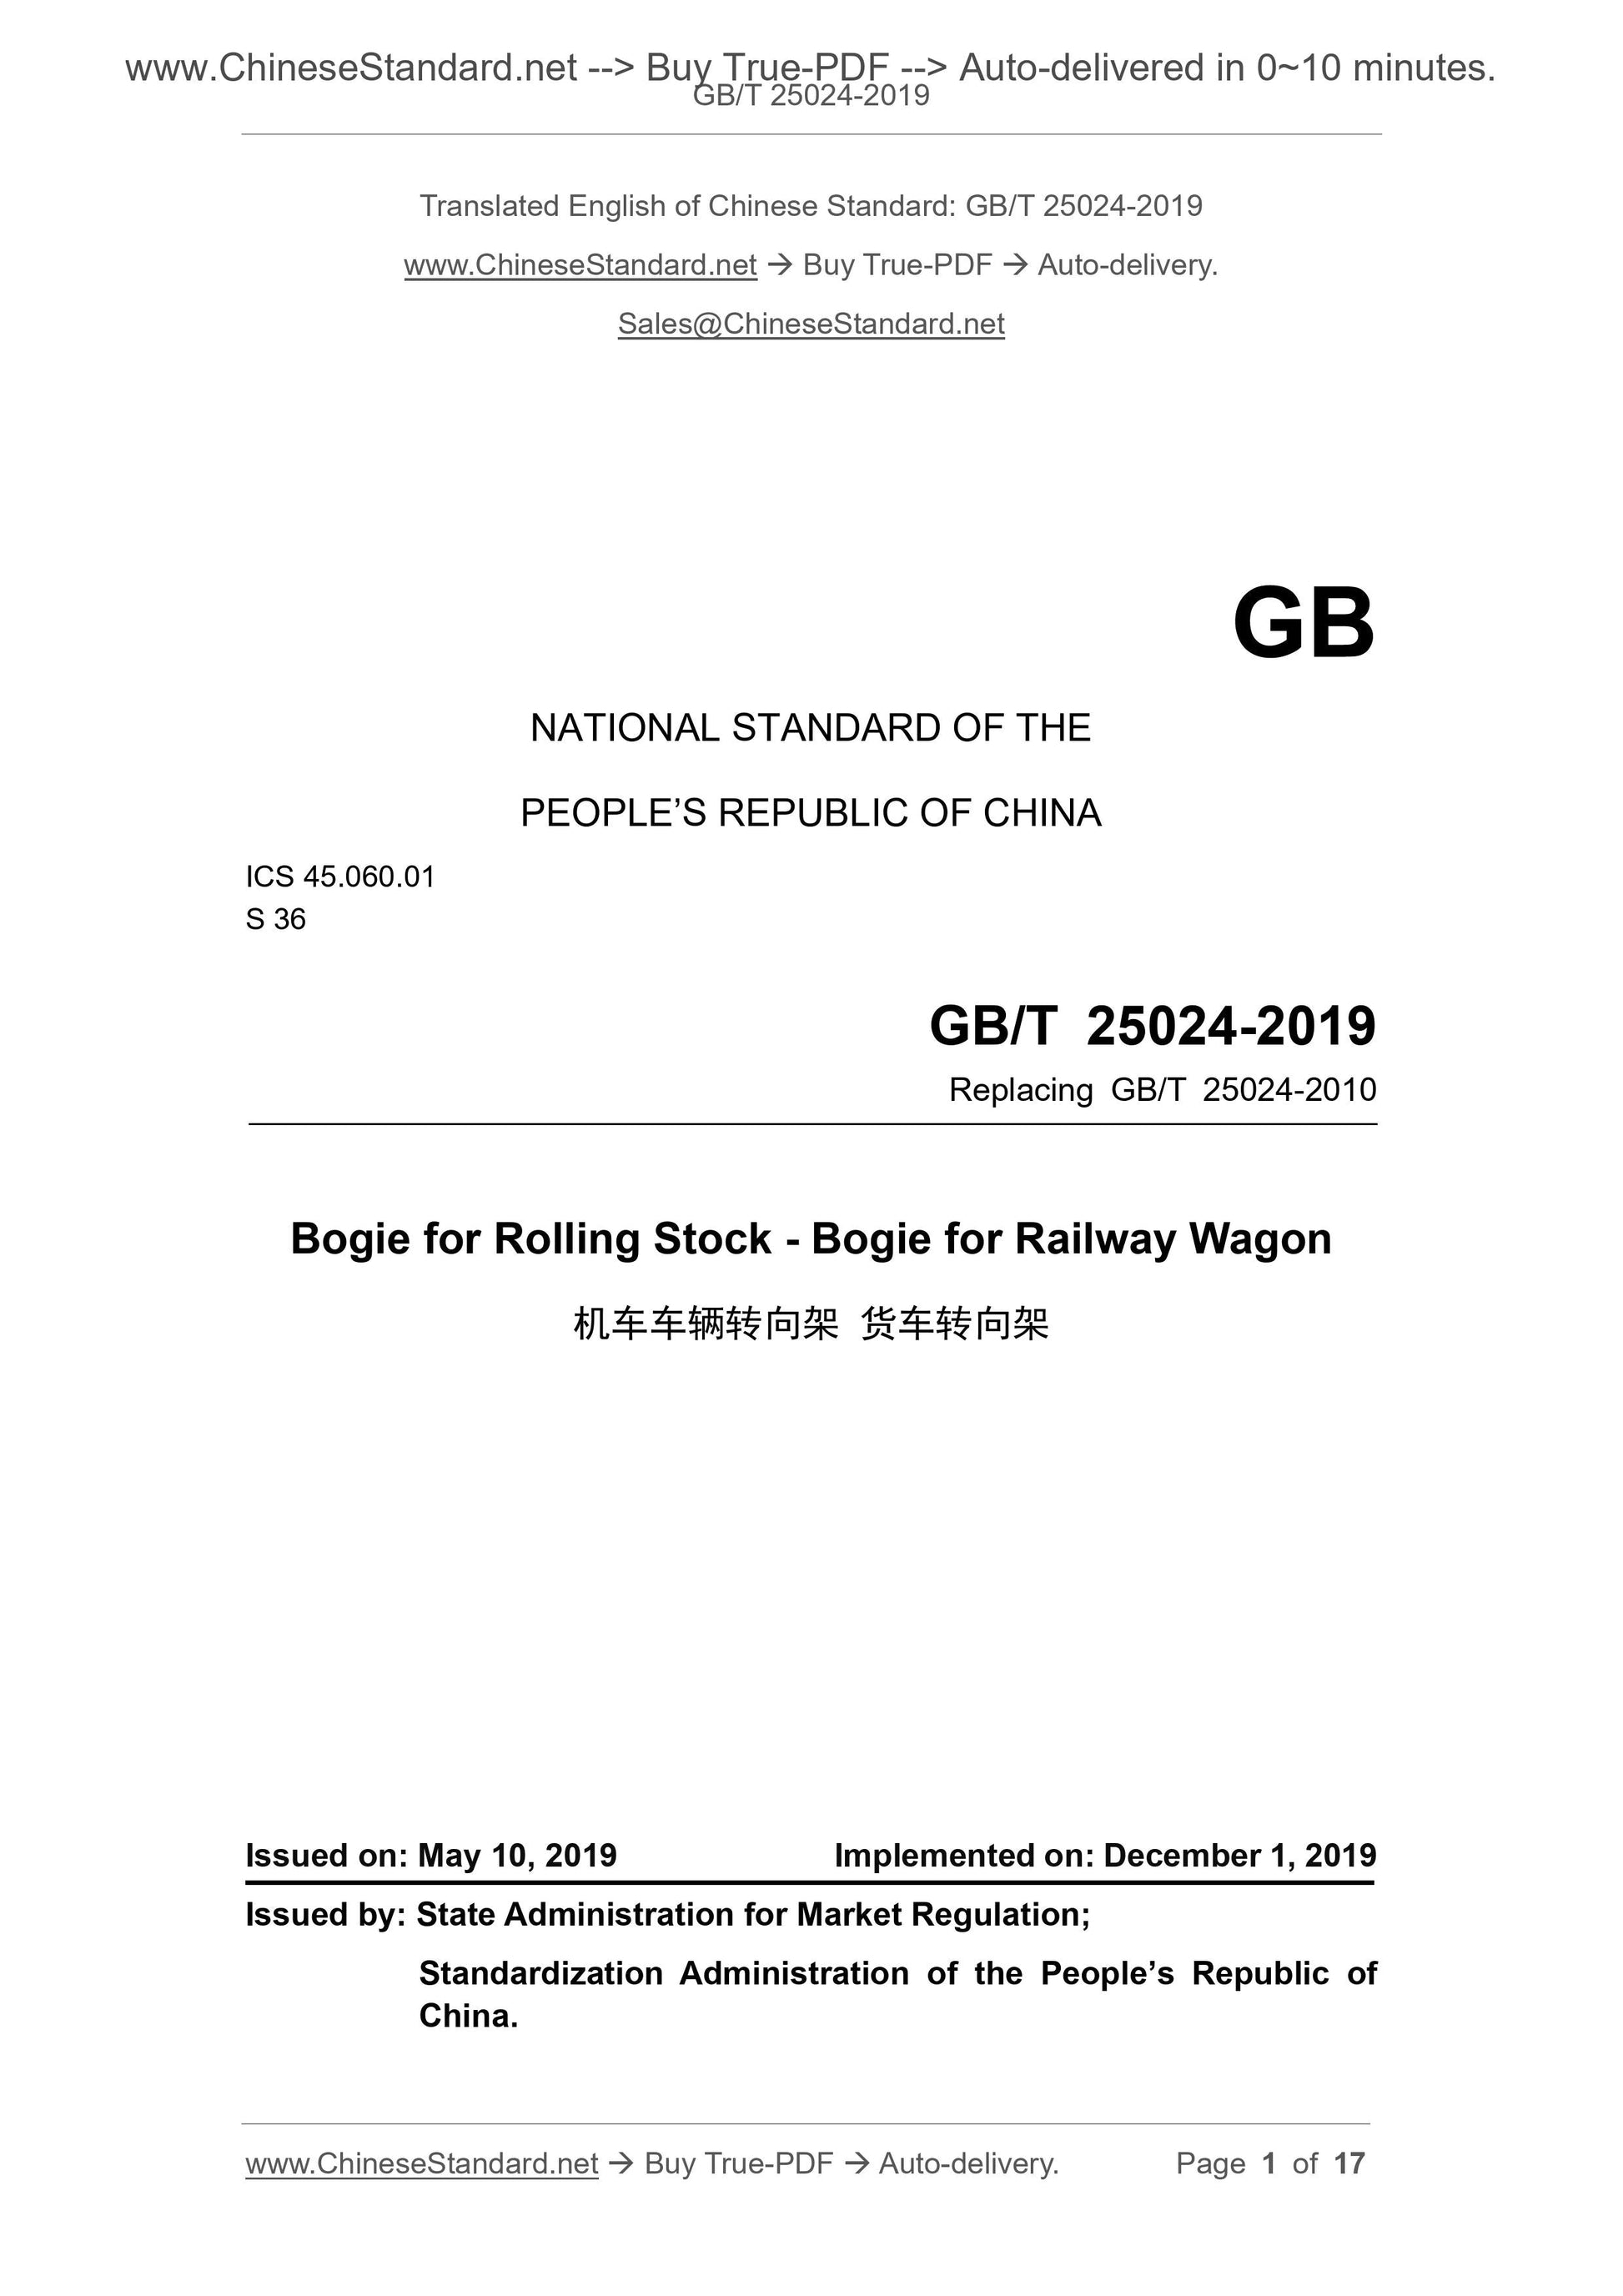 GB/T 25024-2019 Page 1